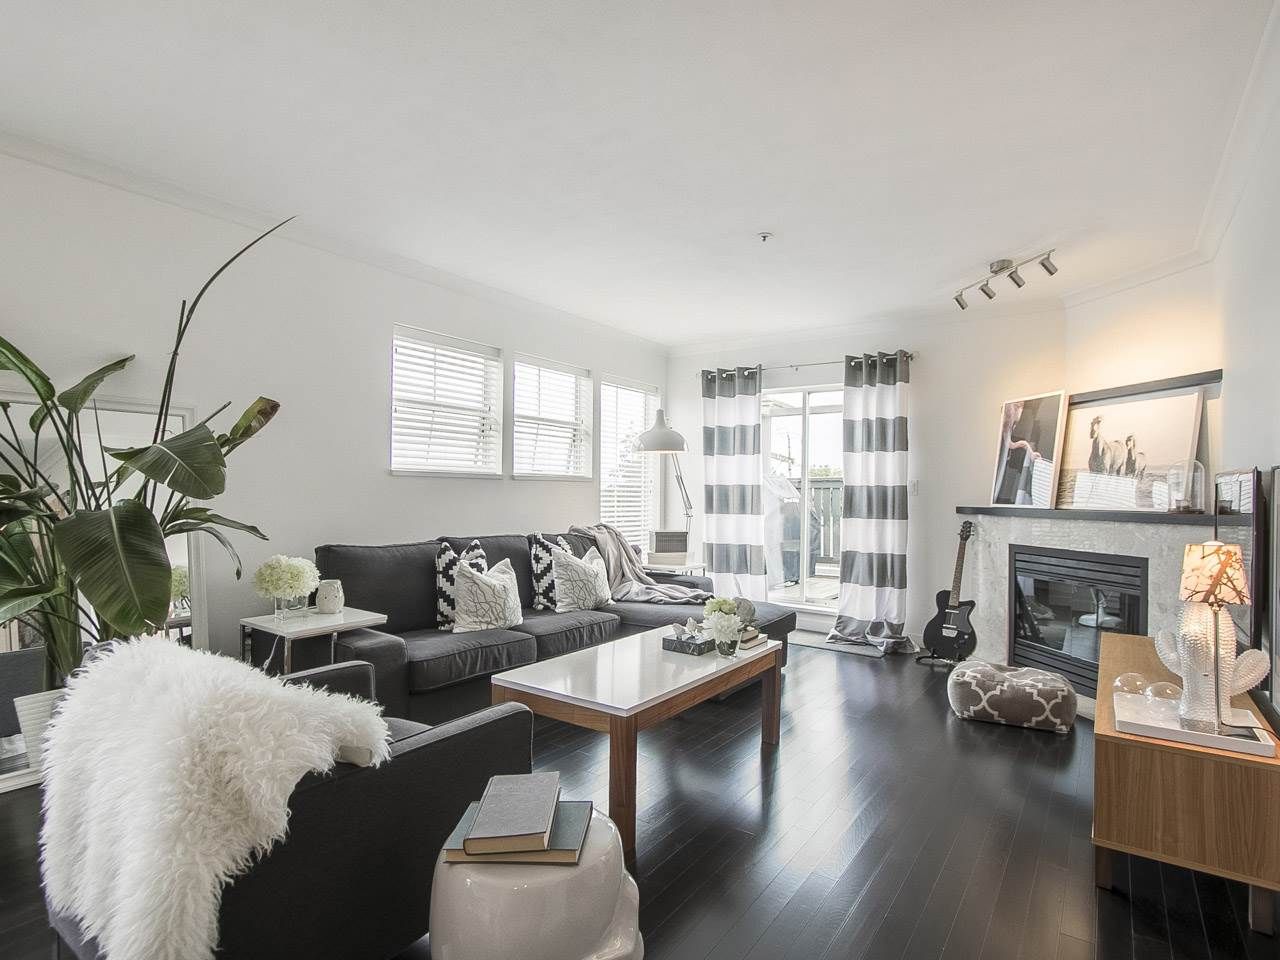 Main Photo: 401 3308 VANNESS Avenue in Vancouver: Collingwood VE Condo for sale (Vancouver East)  : MLS®# R2179695